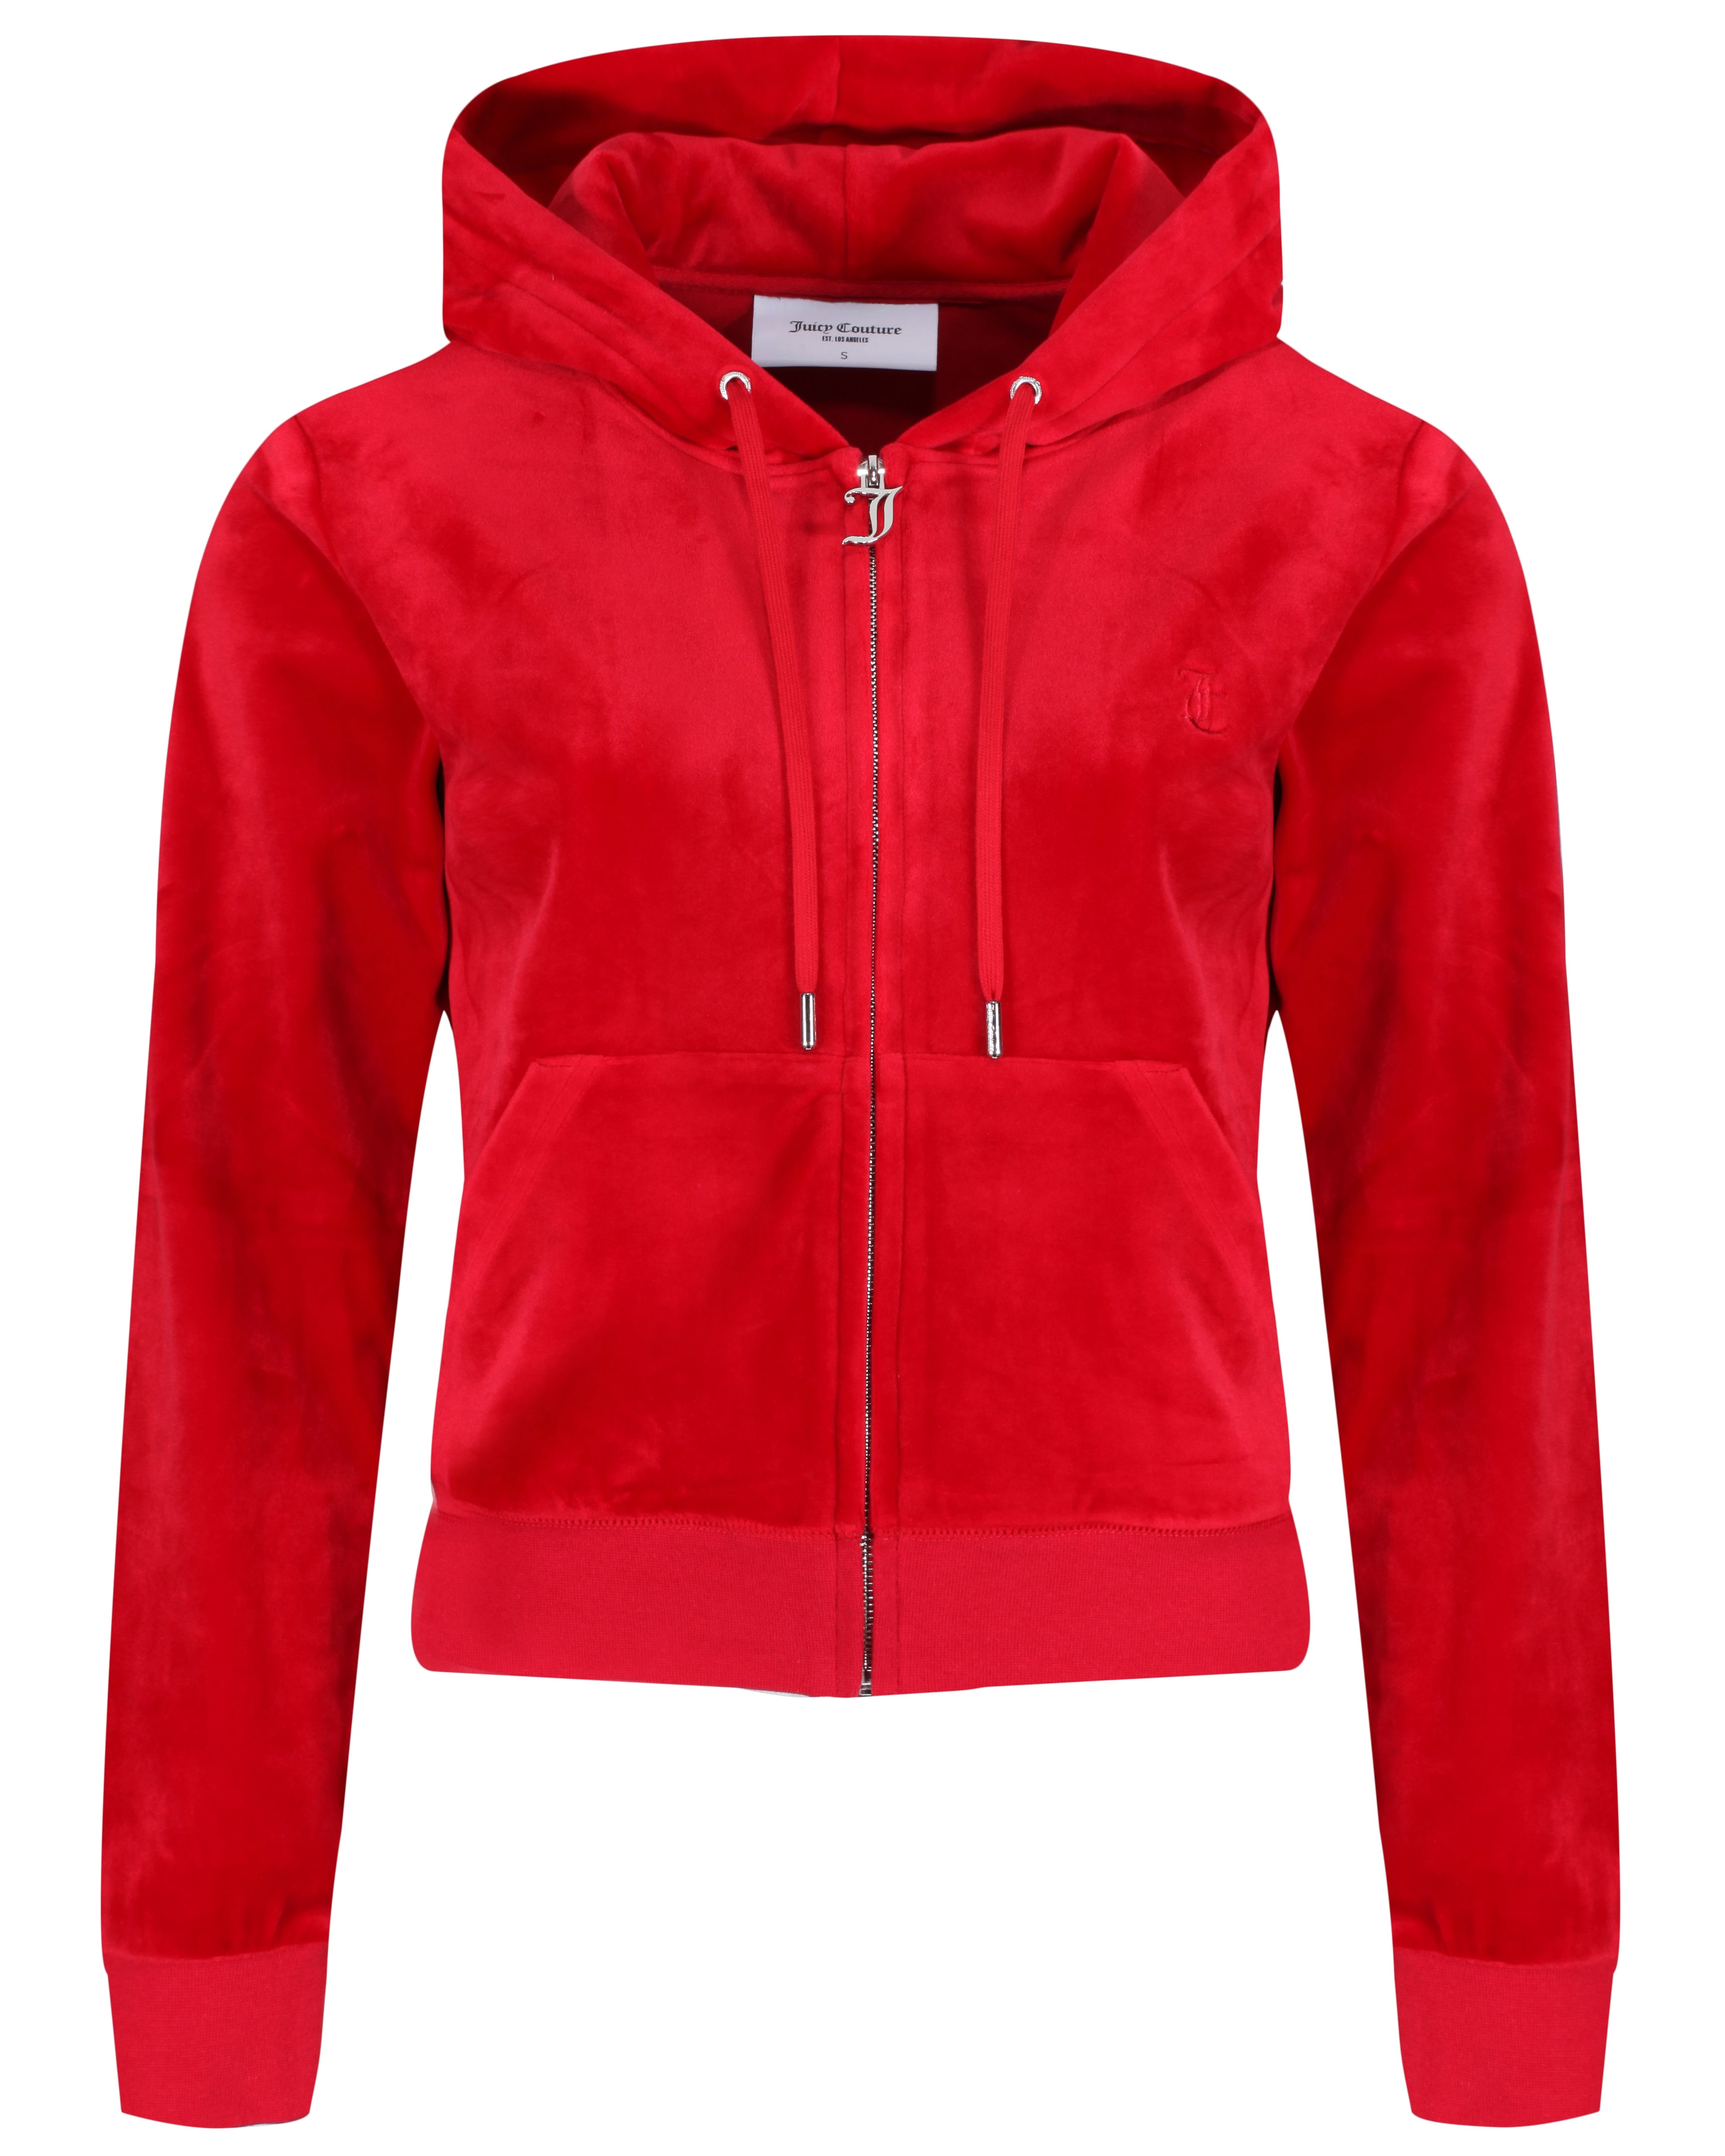 Robertson Classic Velour Zip Hoodie - Astor Red - Juicy Couture - Gensere - VILLOID.no